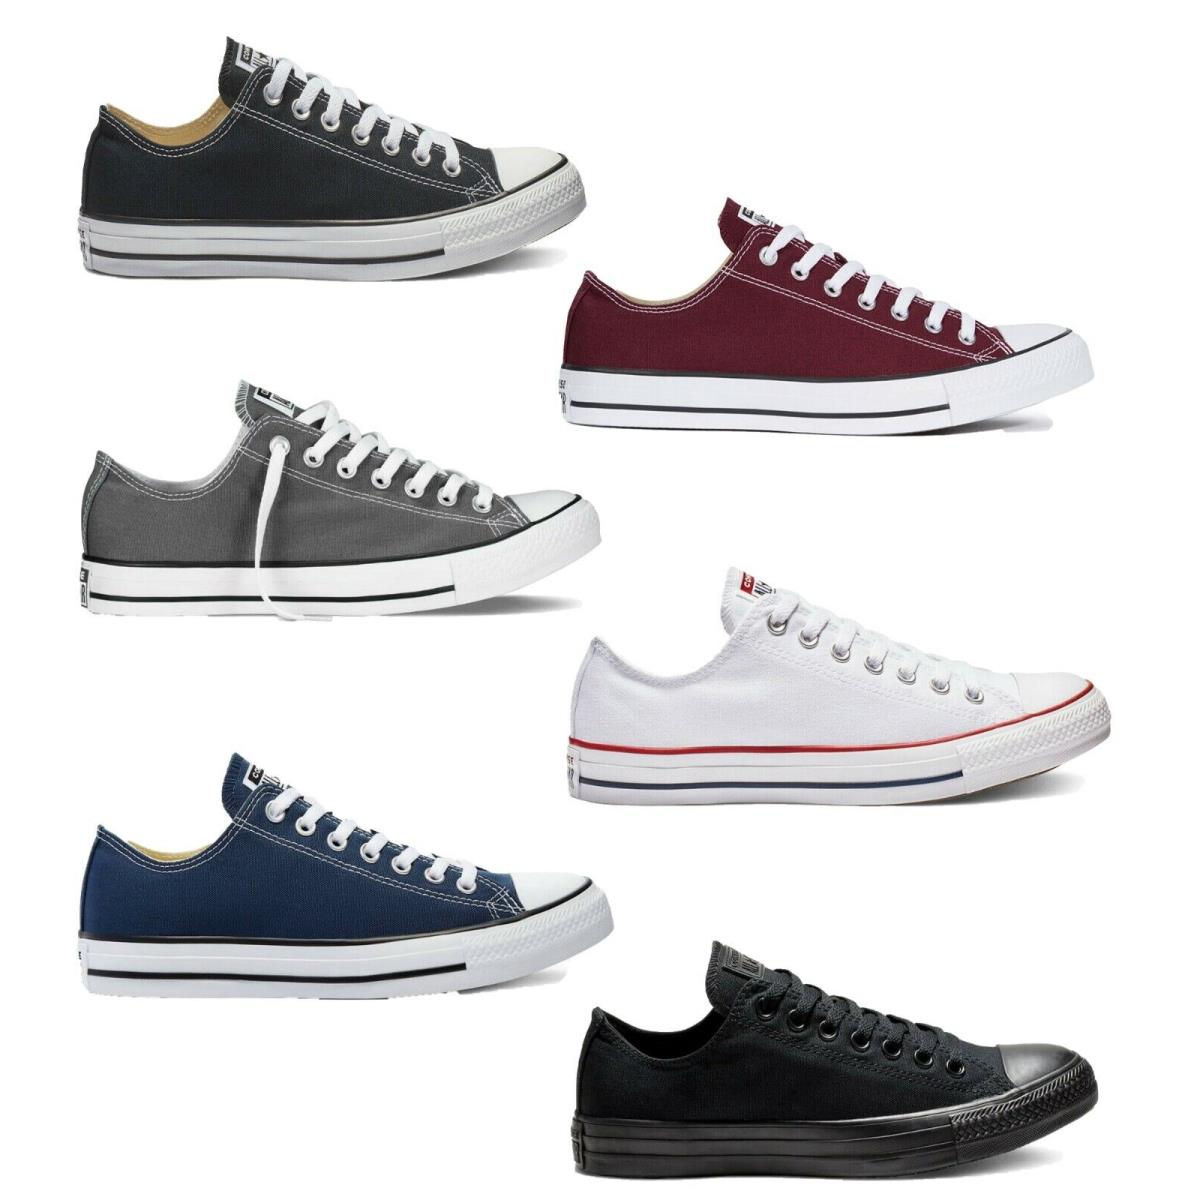 Converse Chuck Taylor All Star Low Top Unisex Canvas Sneaker Shoes